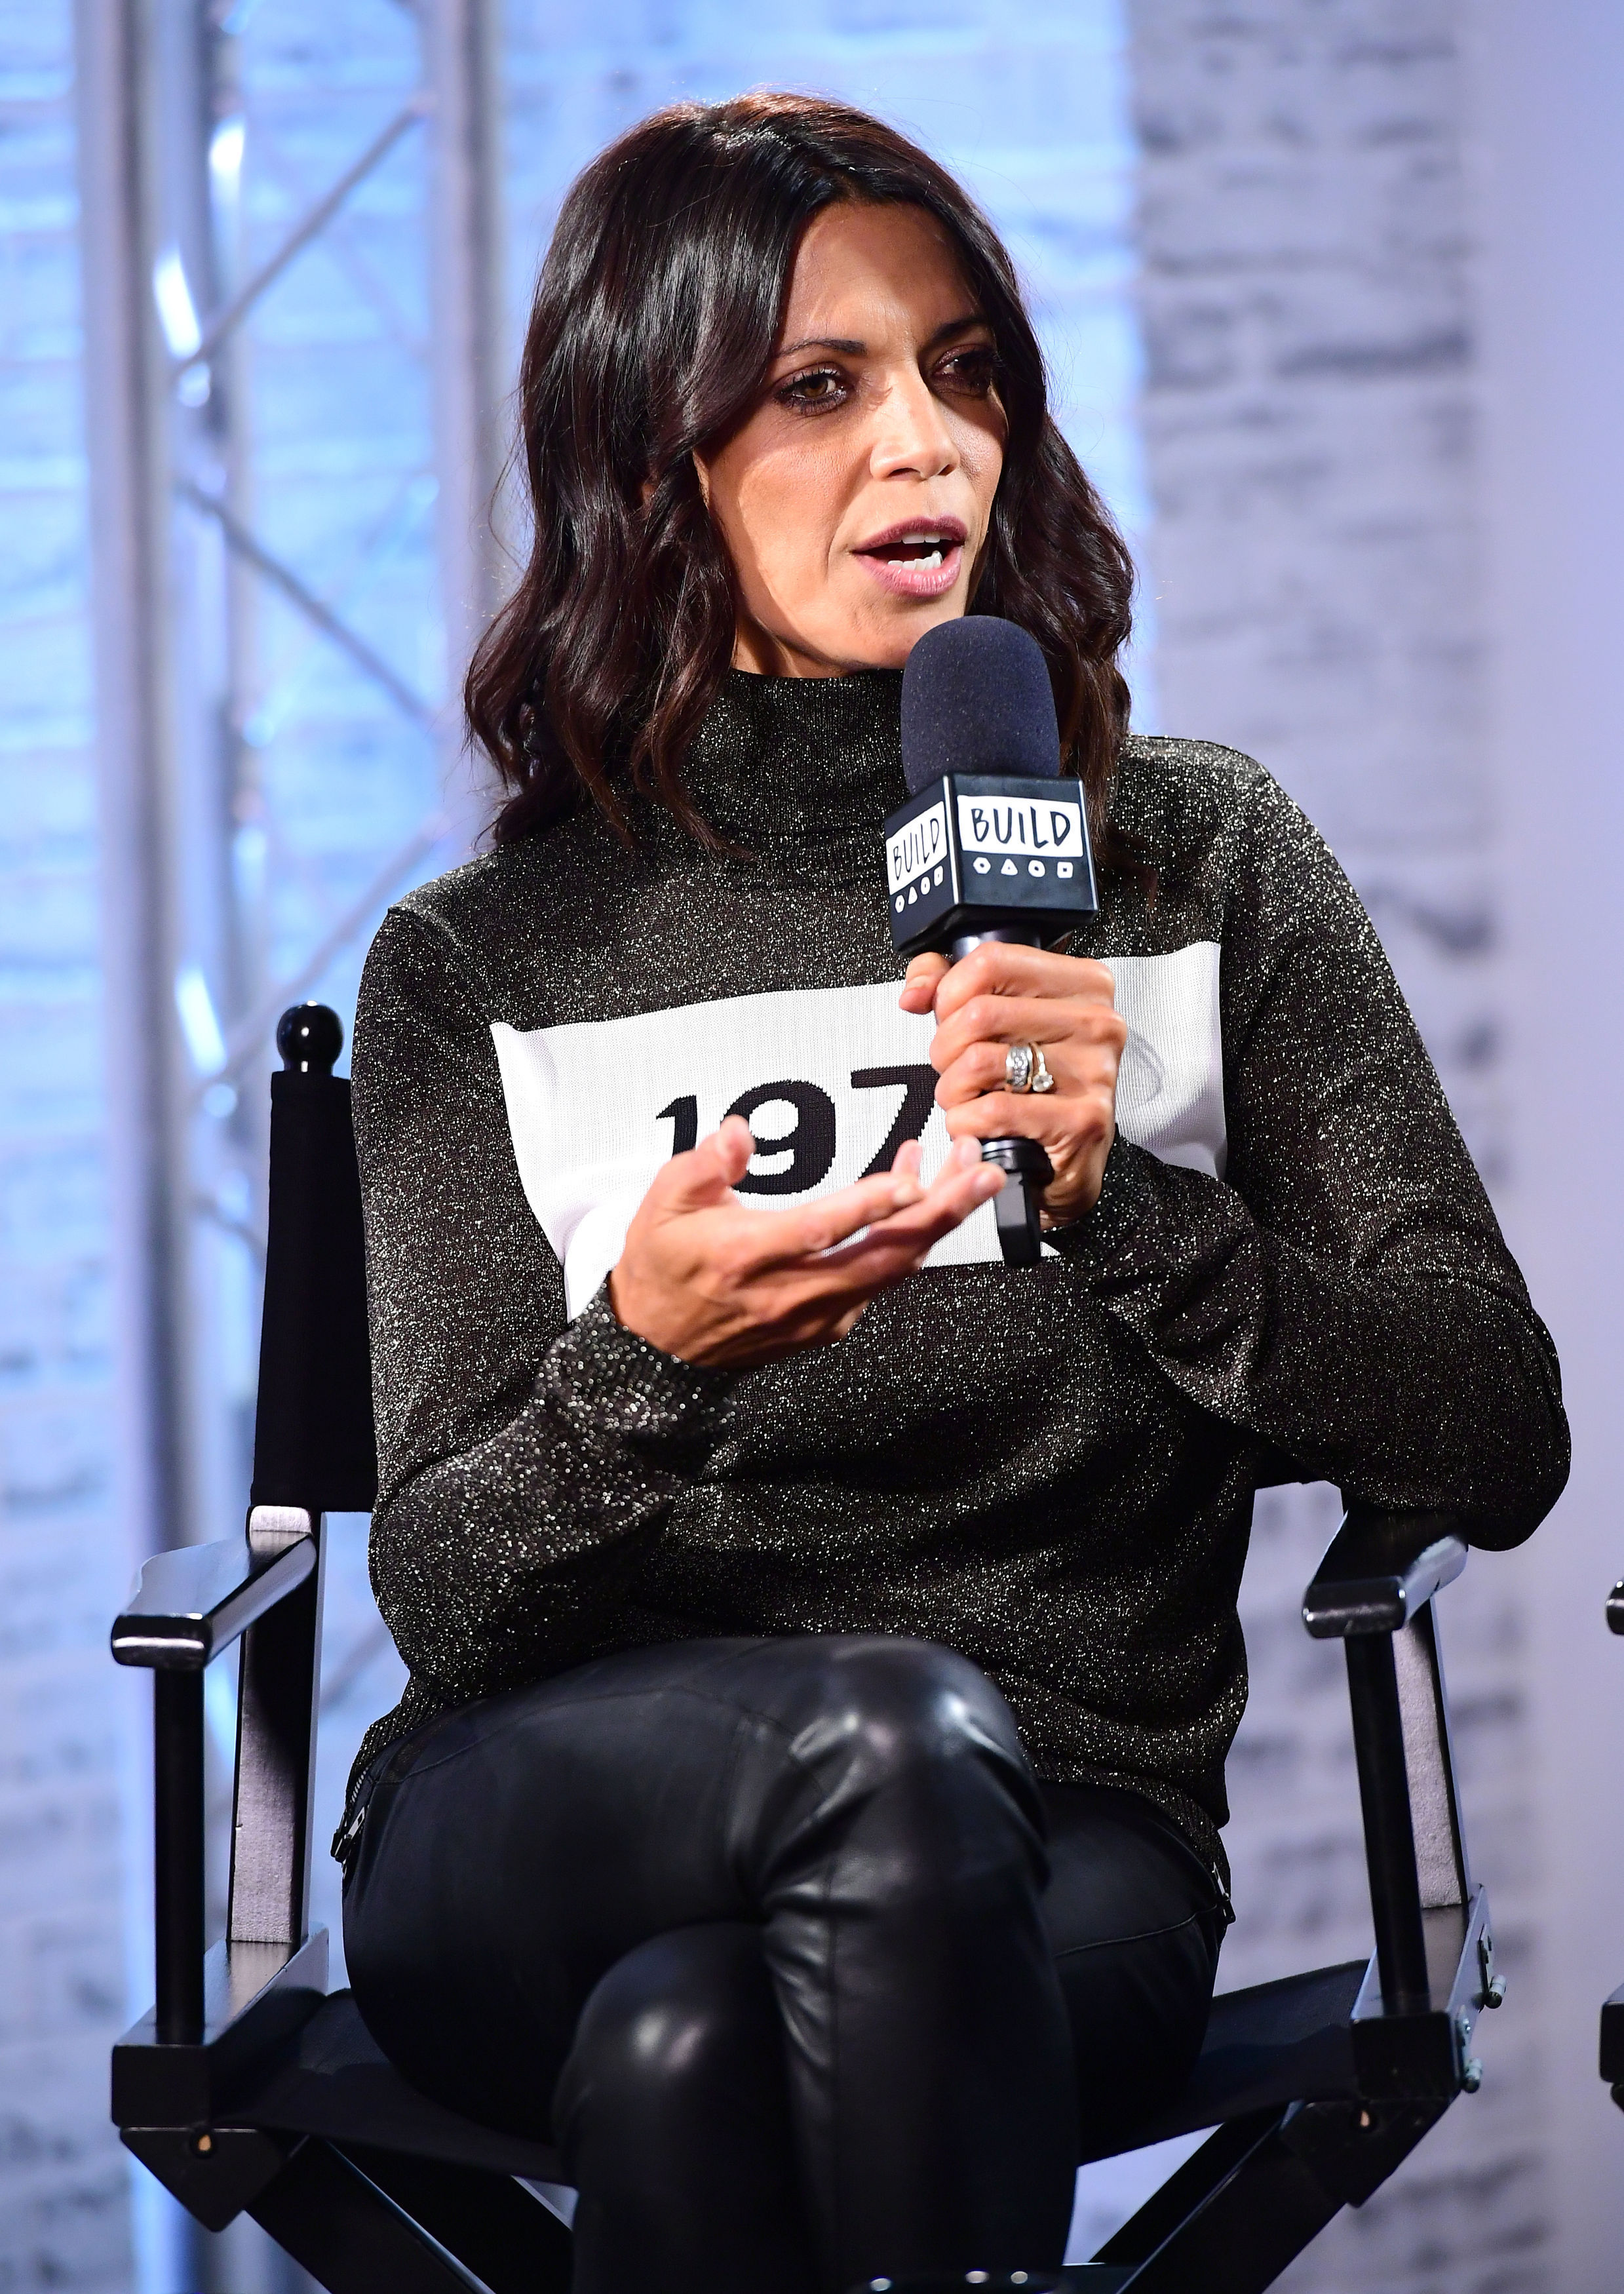 Jenny Powell doing a presenting job in 2017